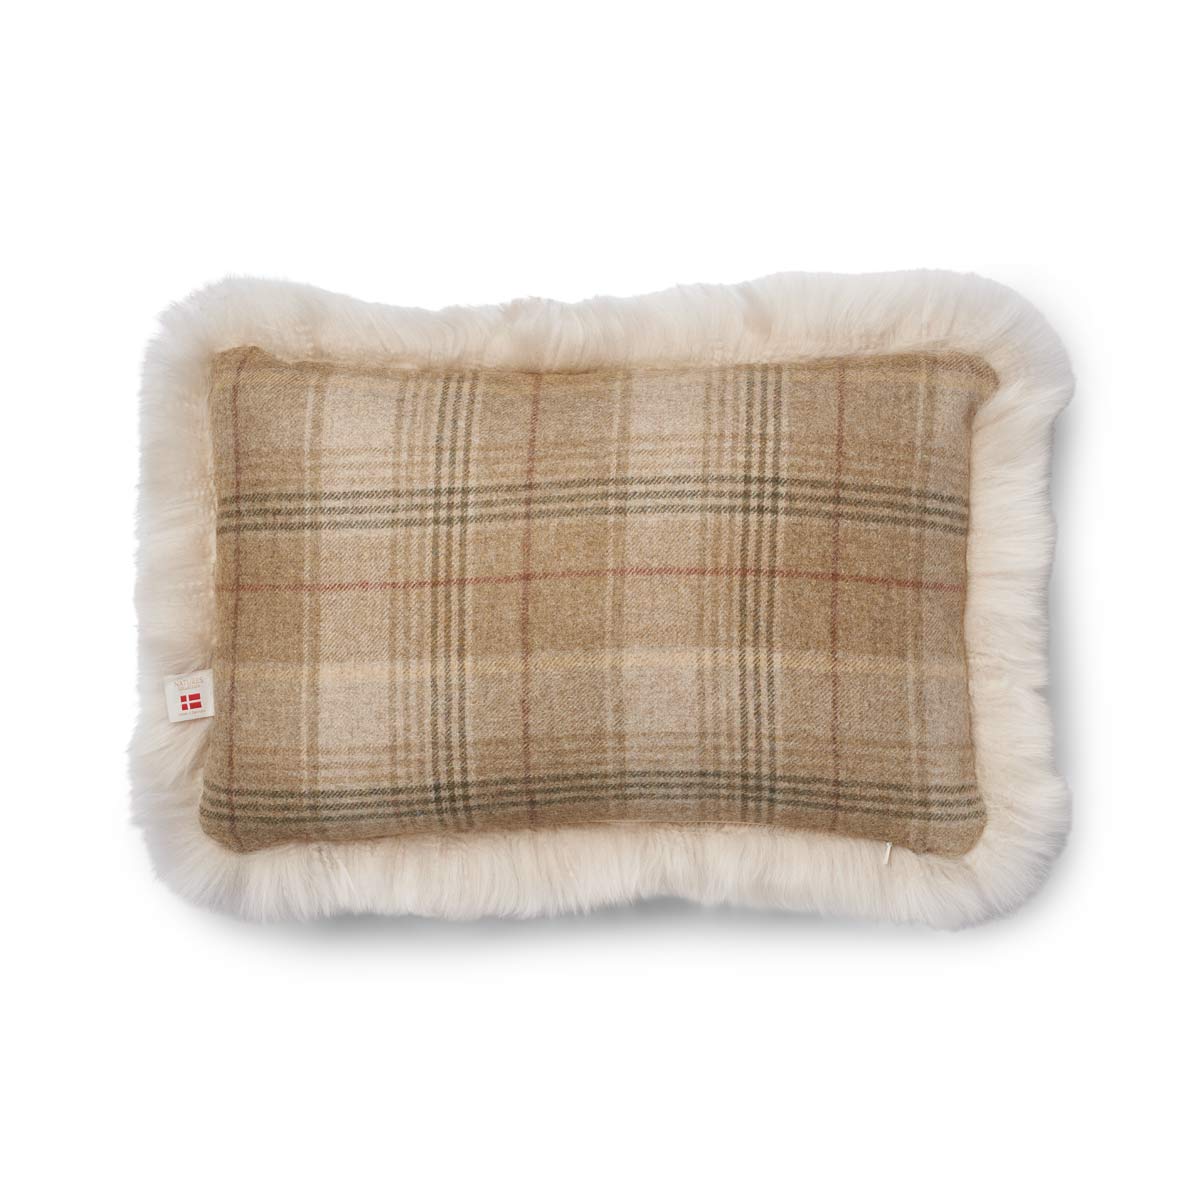 Checked Collection, Cushion One Side 100 % Wool, One Side LW New Zealand Sheepskin. Size: 34x52 cm.